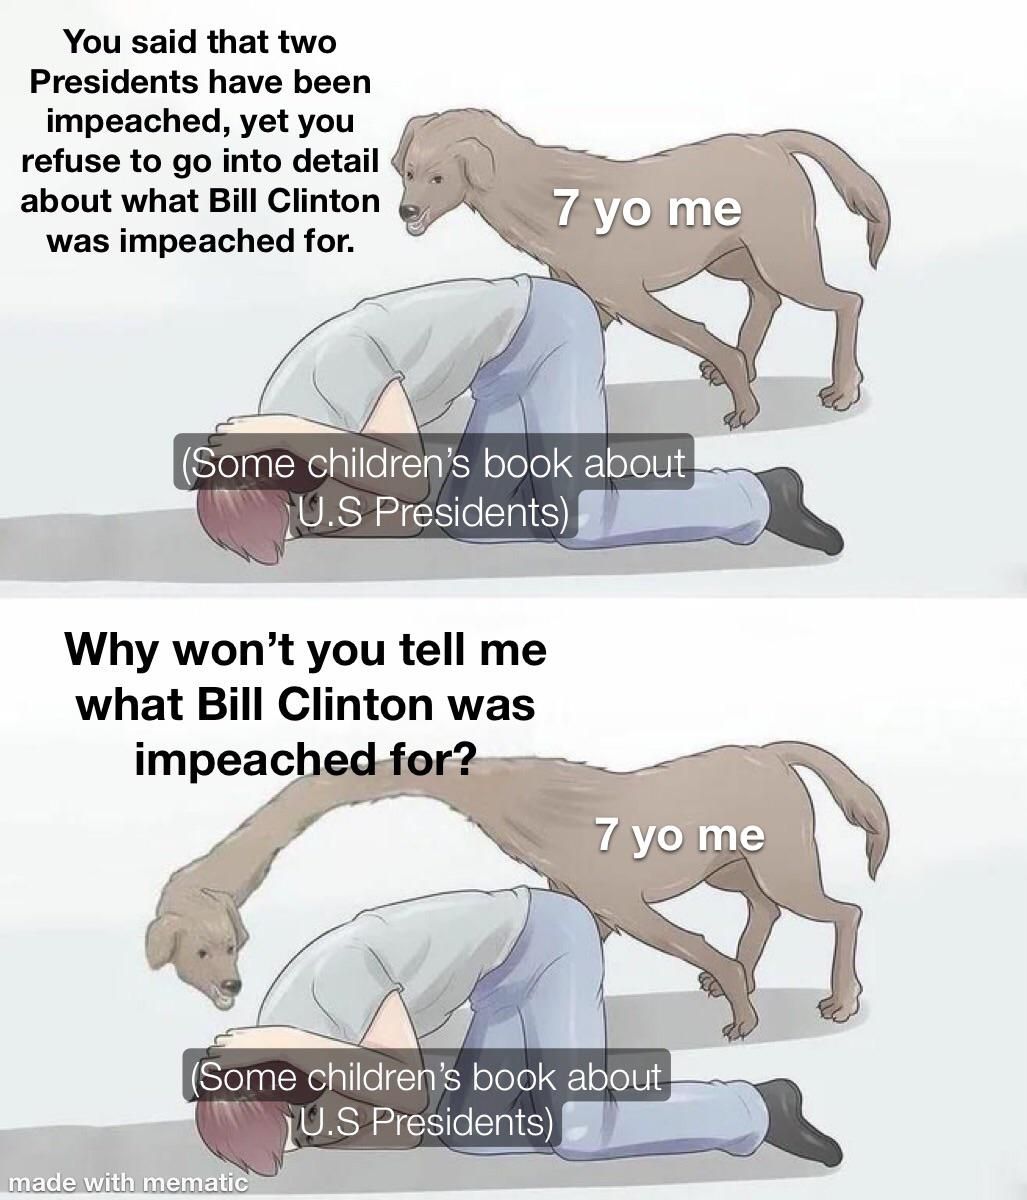 It would be difficult to explain to a child why Bill Clinton was impeached